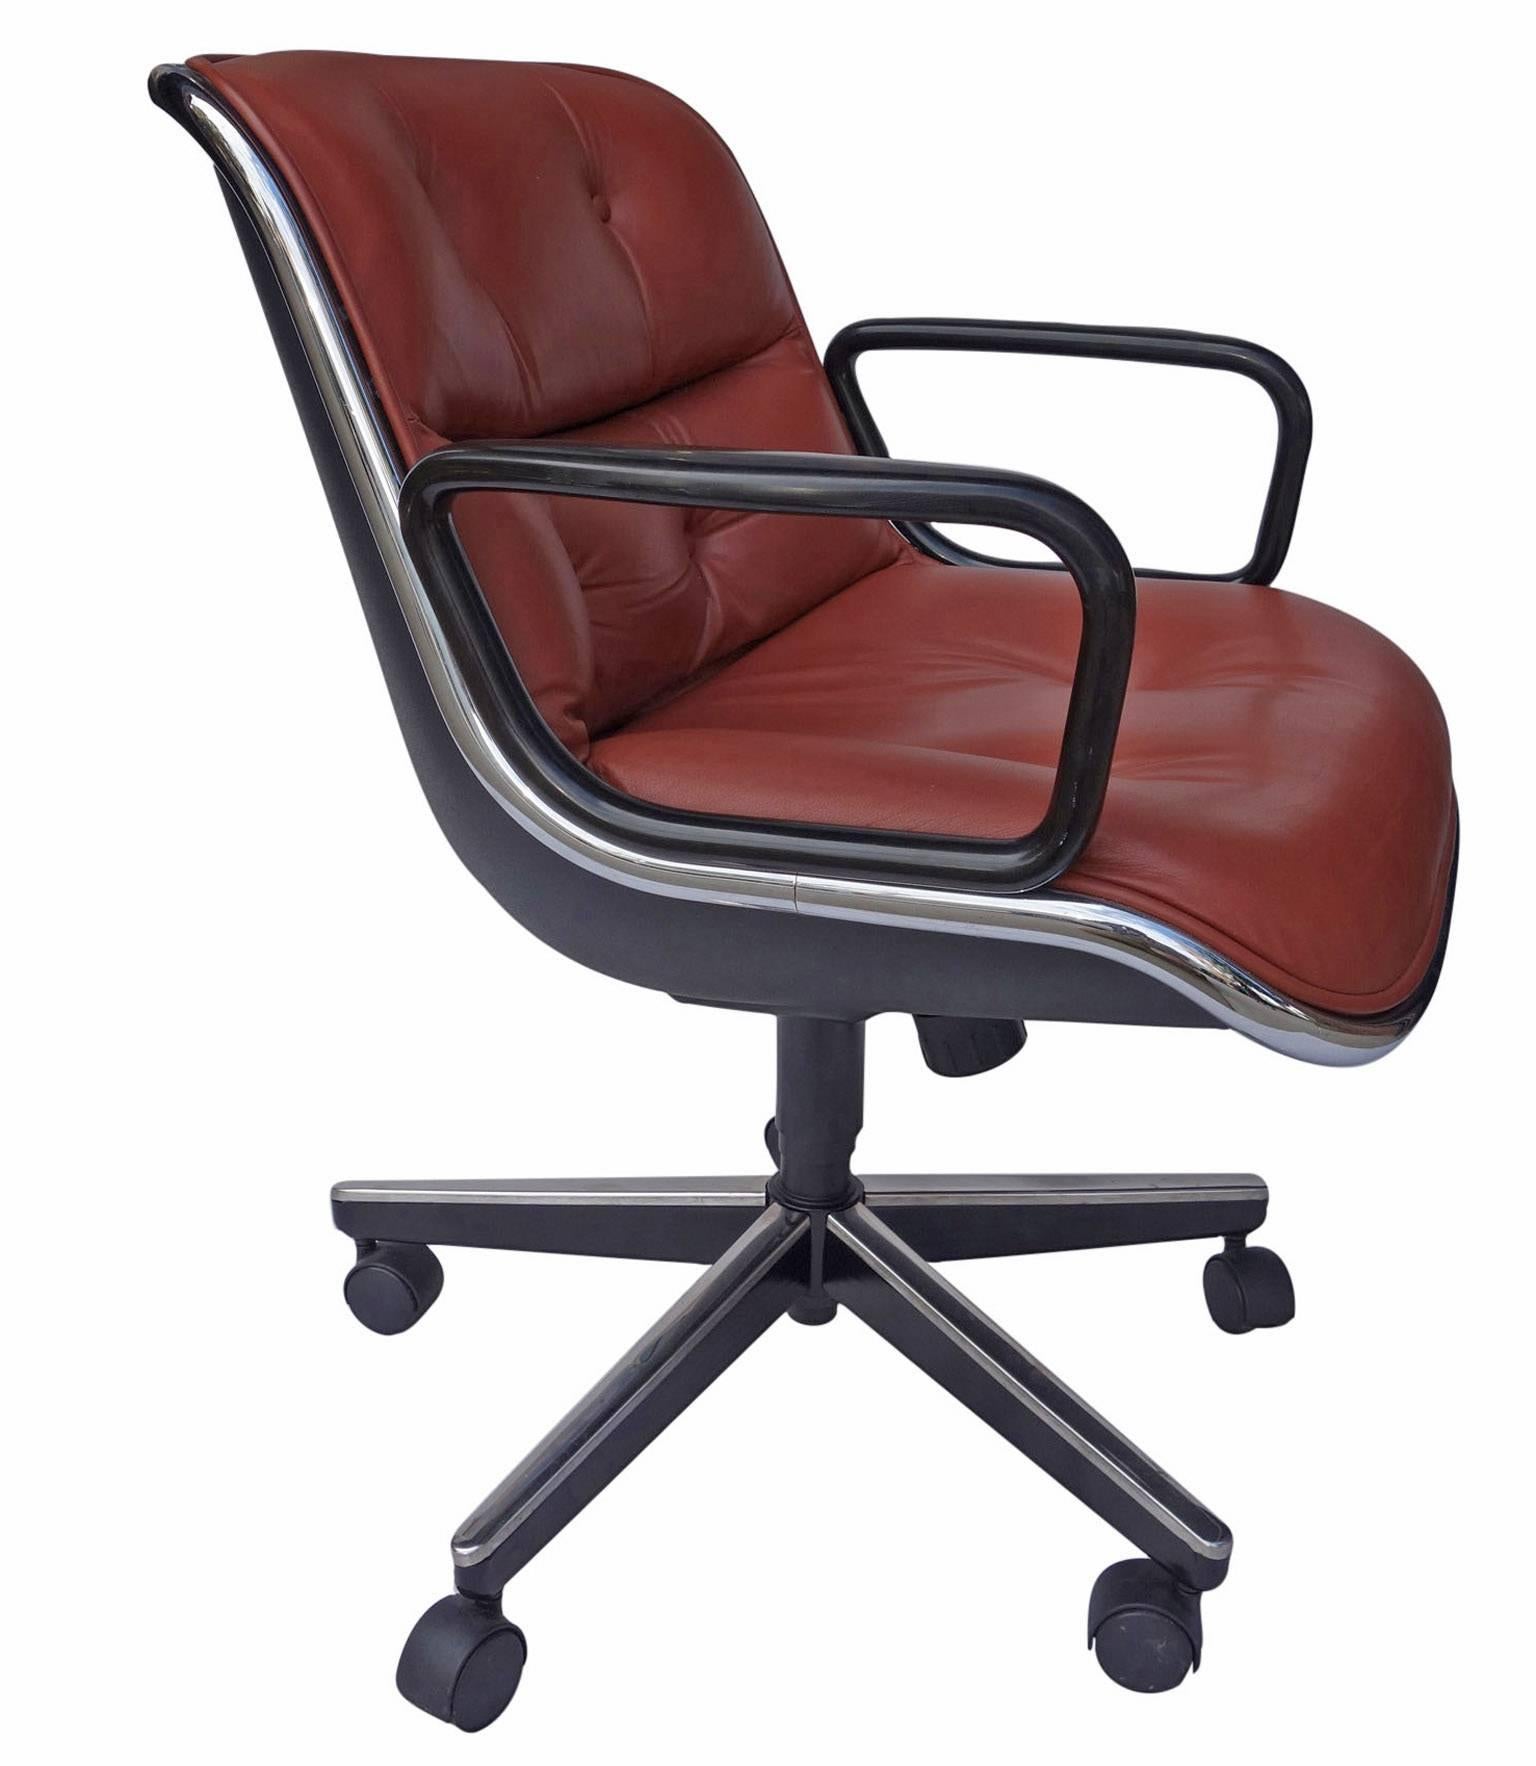 Charles Pollock for Knoll office desk chairs featuring leather upholstery. This executive office chair is an icon of Mid-Century Modern design and has been in continuous production by Knoll since its introduction in the 1960s. Designer Charles